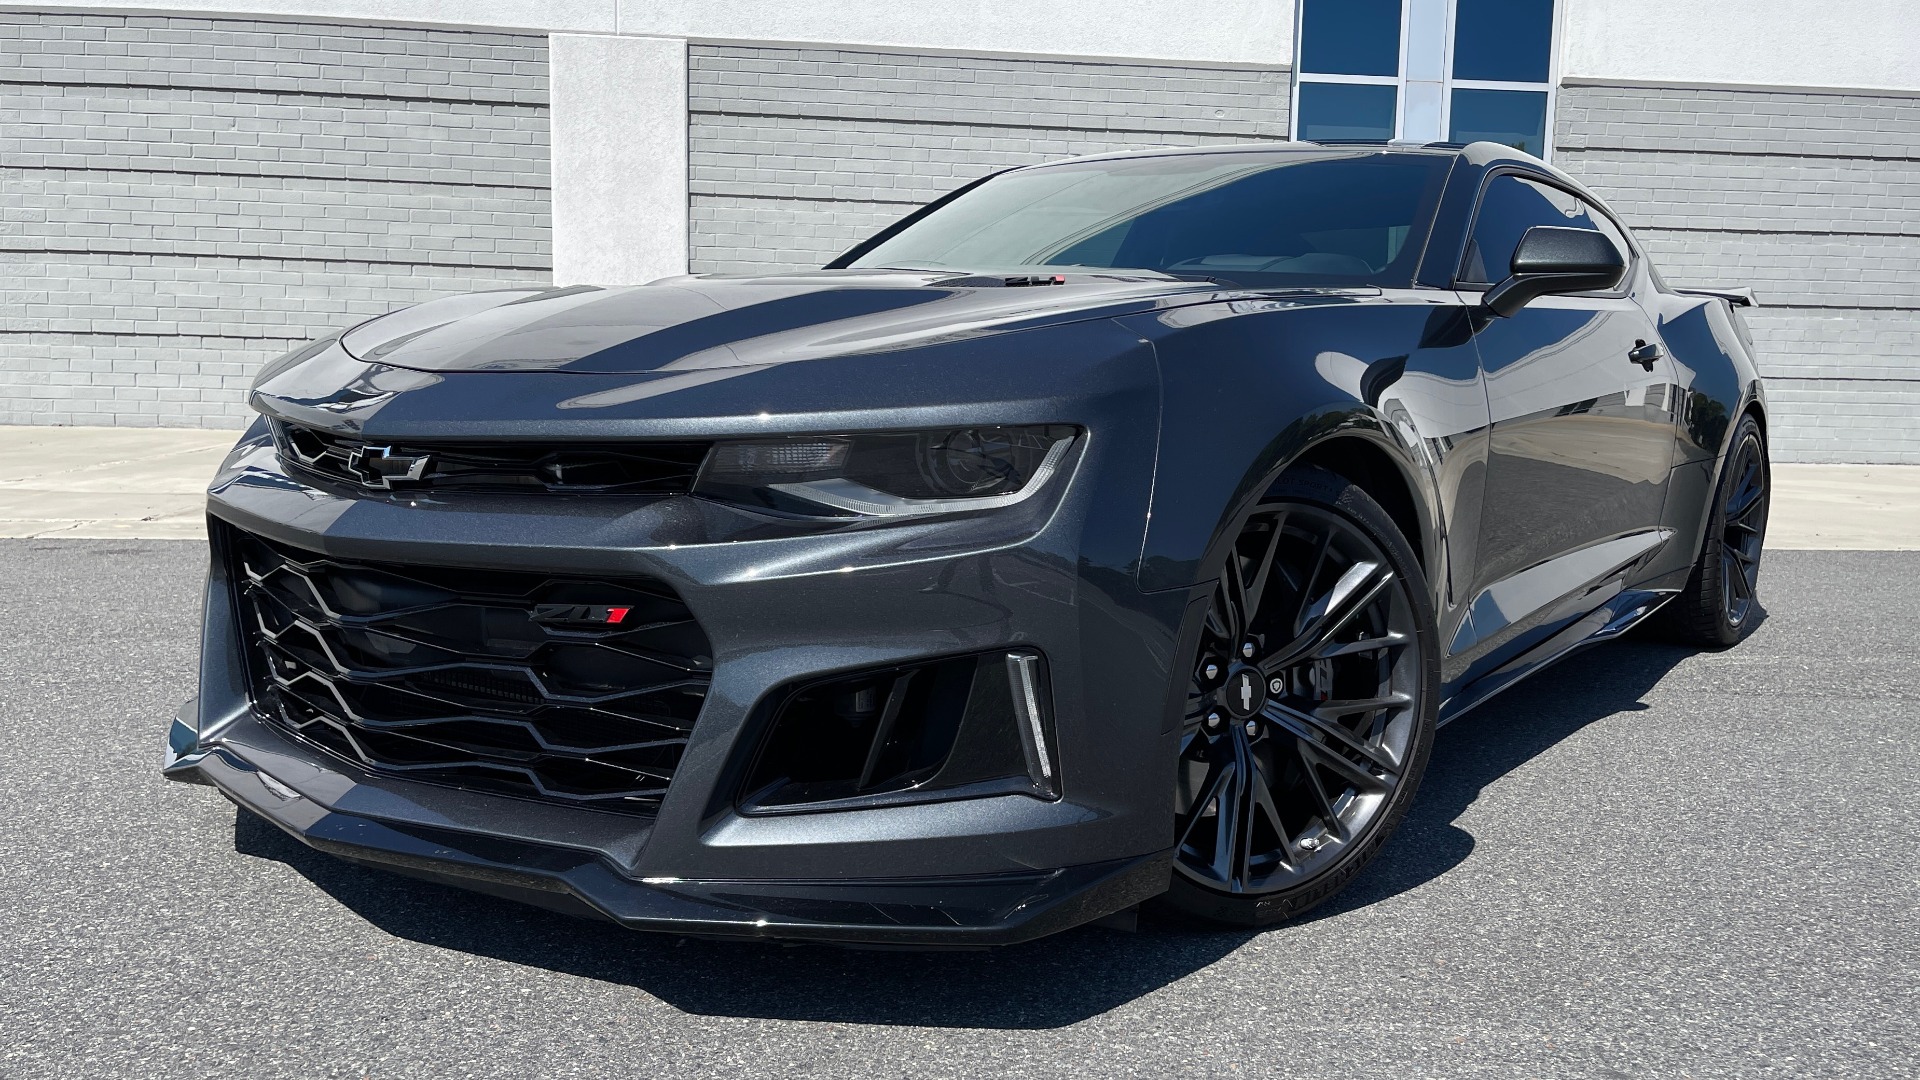 Used 2018 Chevrolet CAMARO ZL1 SUPERCHARGED COUPE 850HP / 10-SPD AUTO / NAV / BOSE / REARVIEW for sale Sold at Formula Imports in Charlotte NC 28227 1